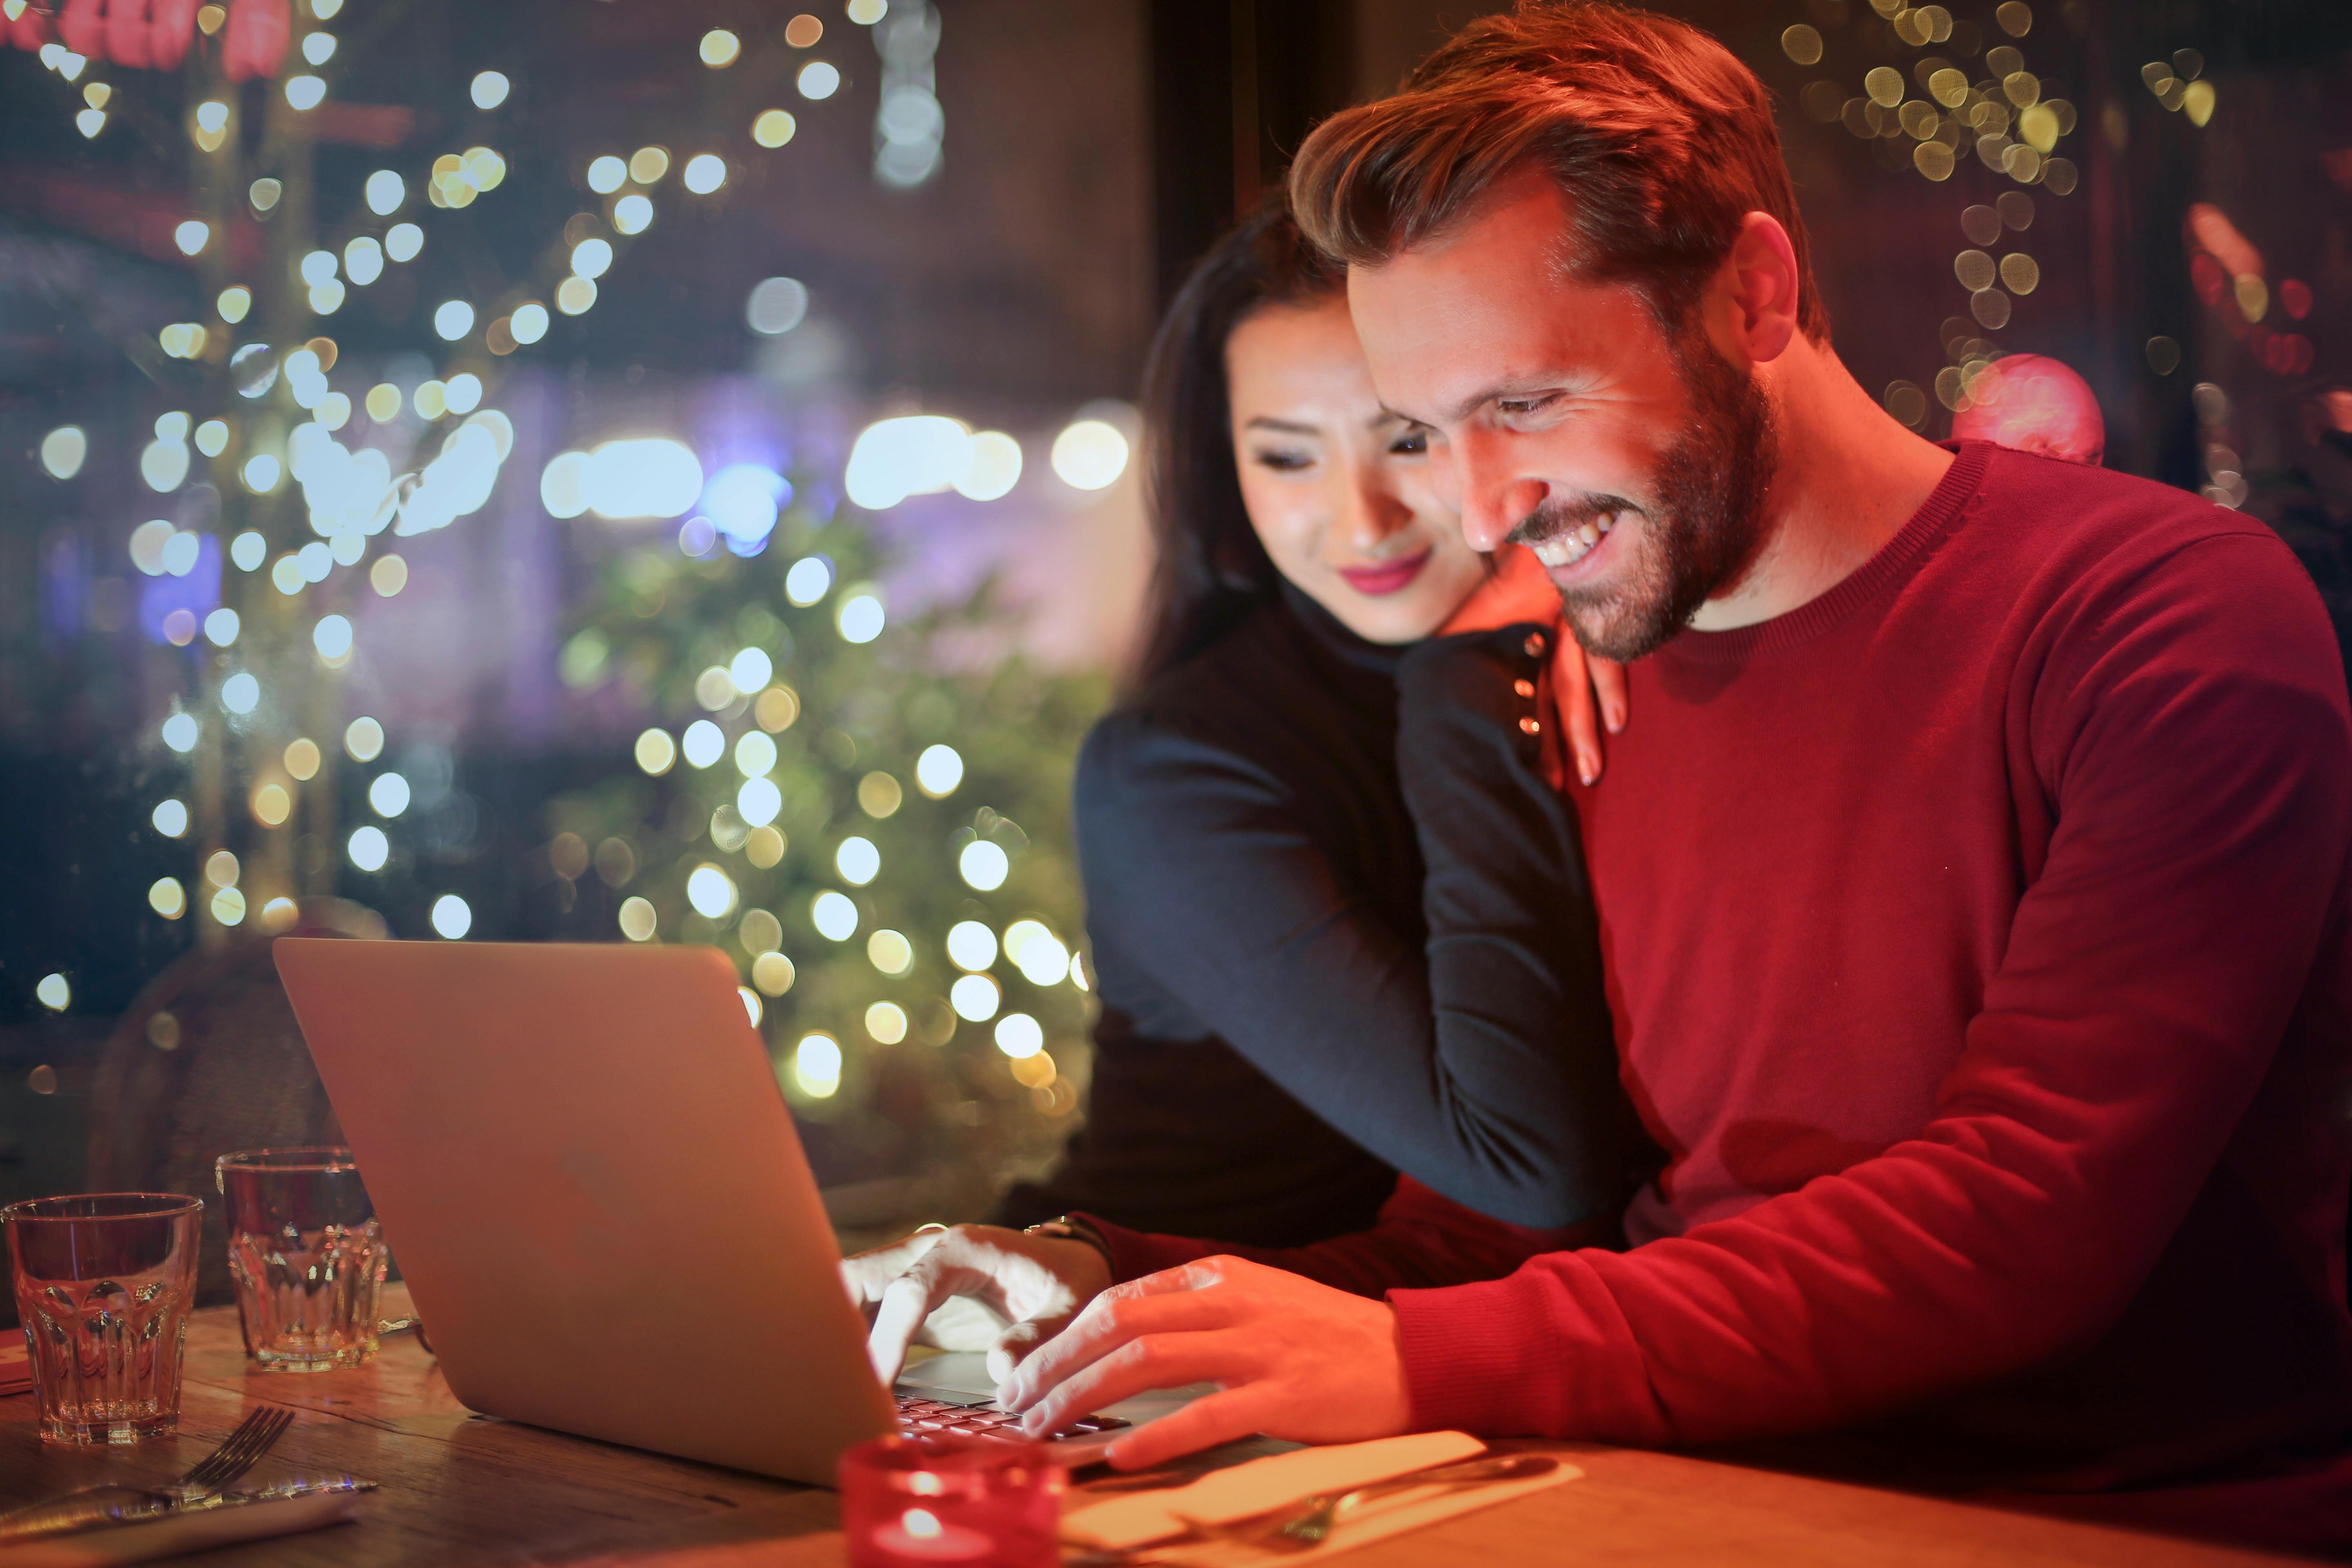 A woman and man while working on a laptop | Source: Pexels